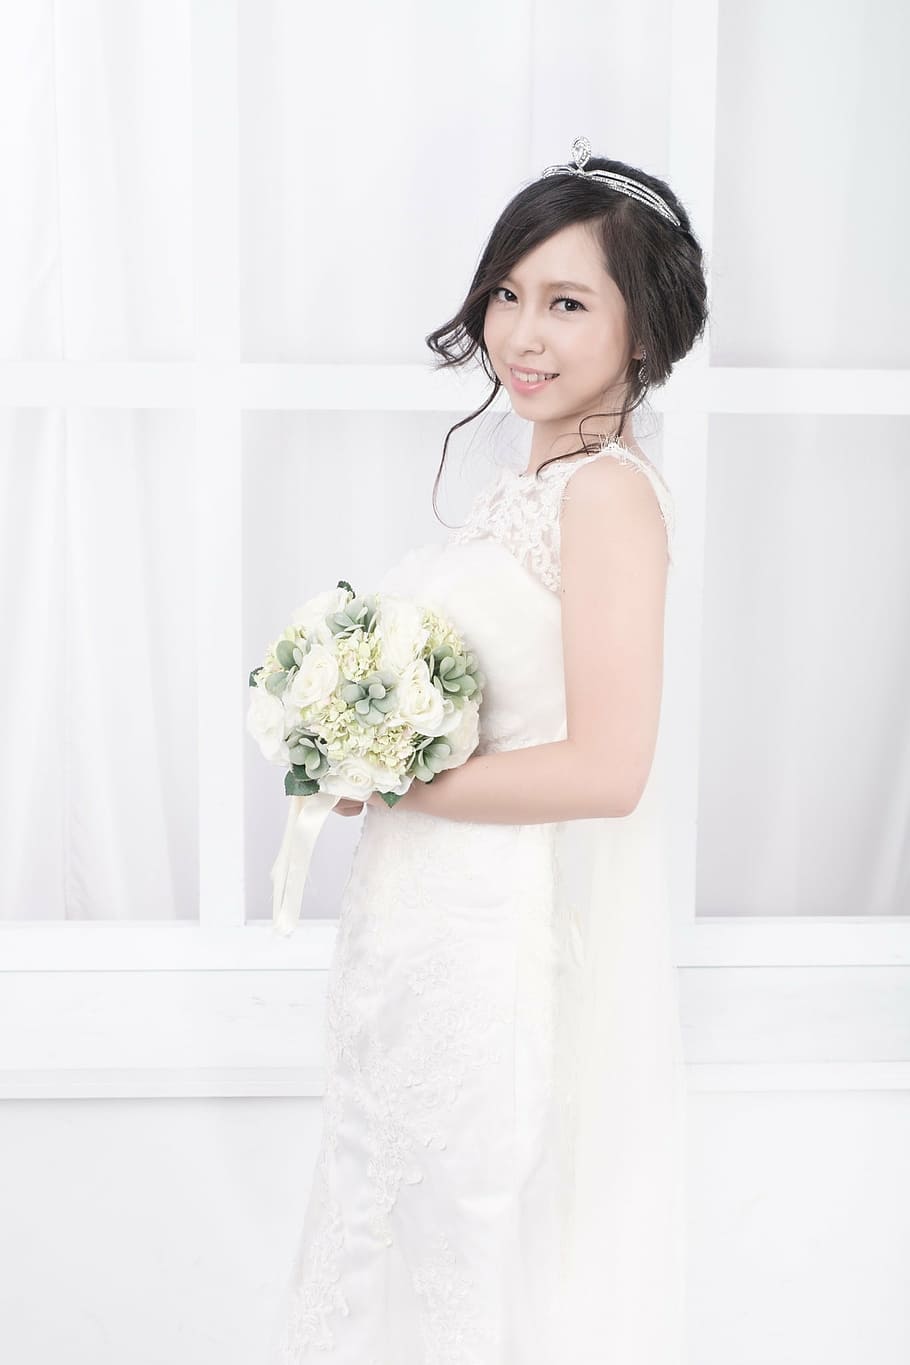 bride, girls, get married, hairstyle, wedding dress, wedding, bouquet, white color, young adult, one young woman only